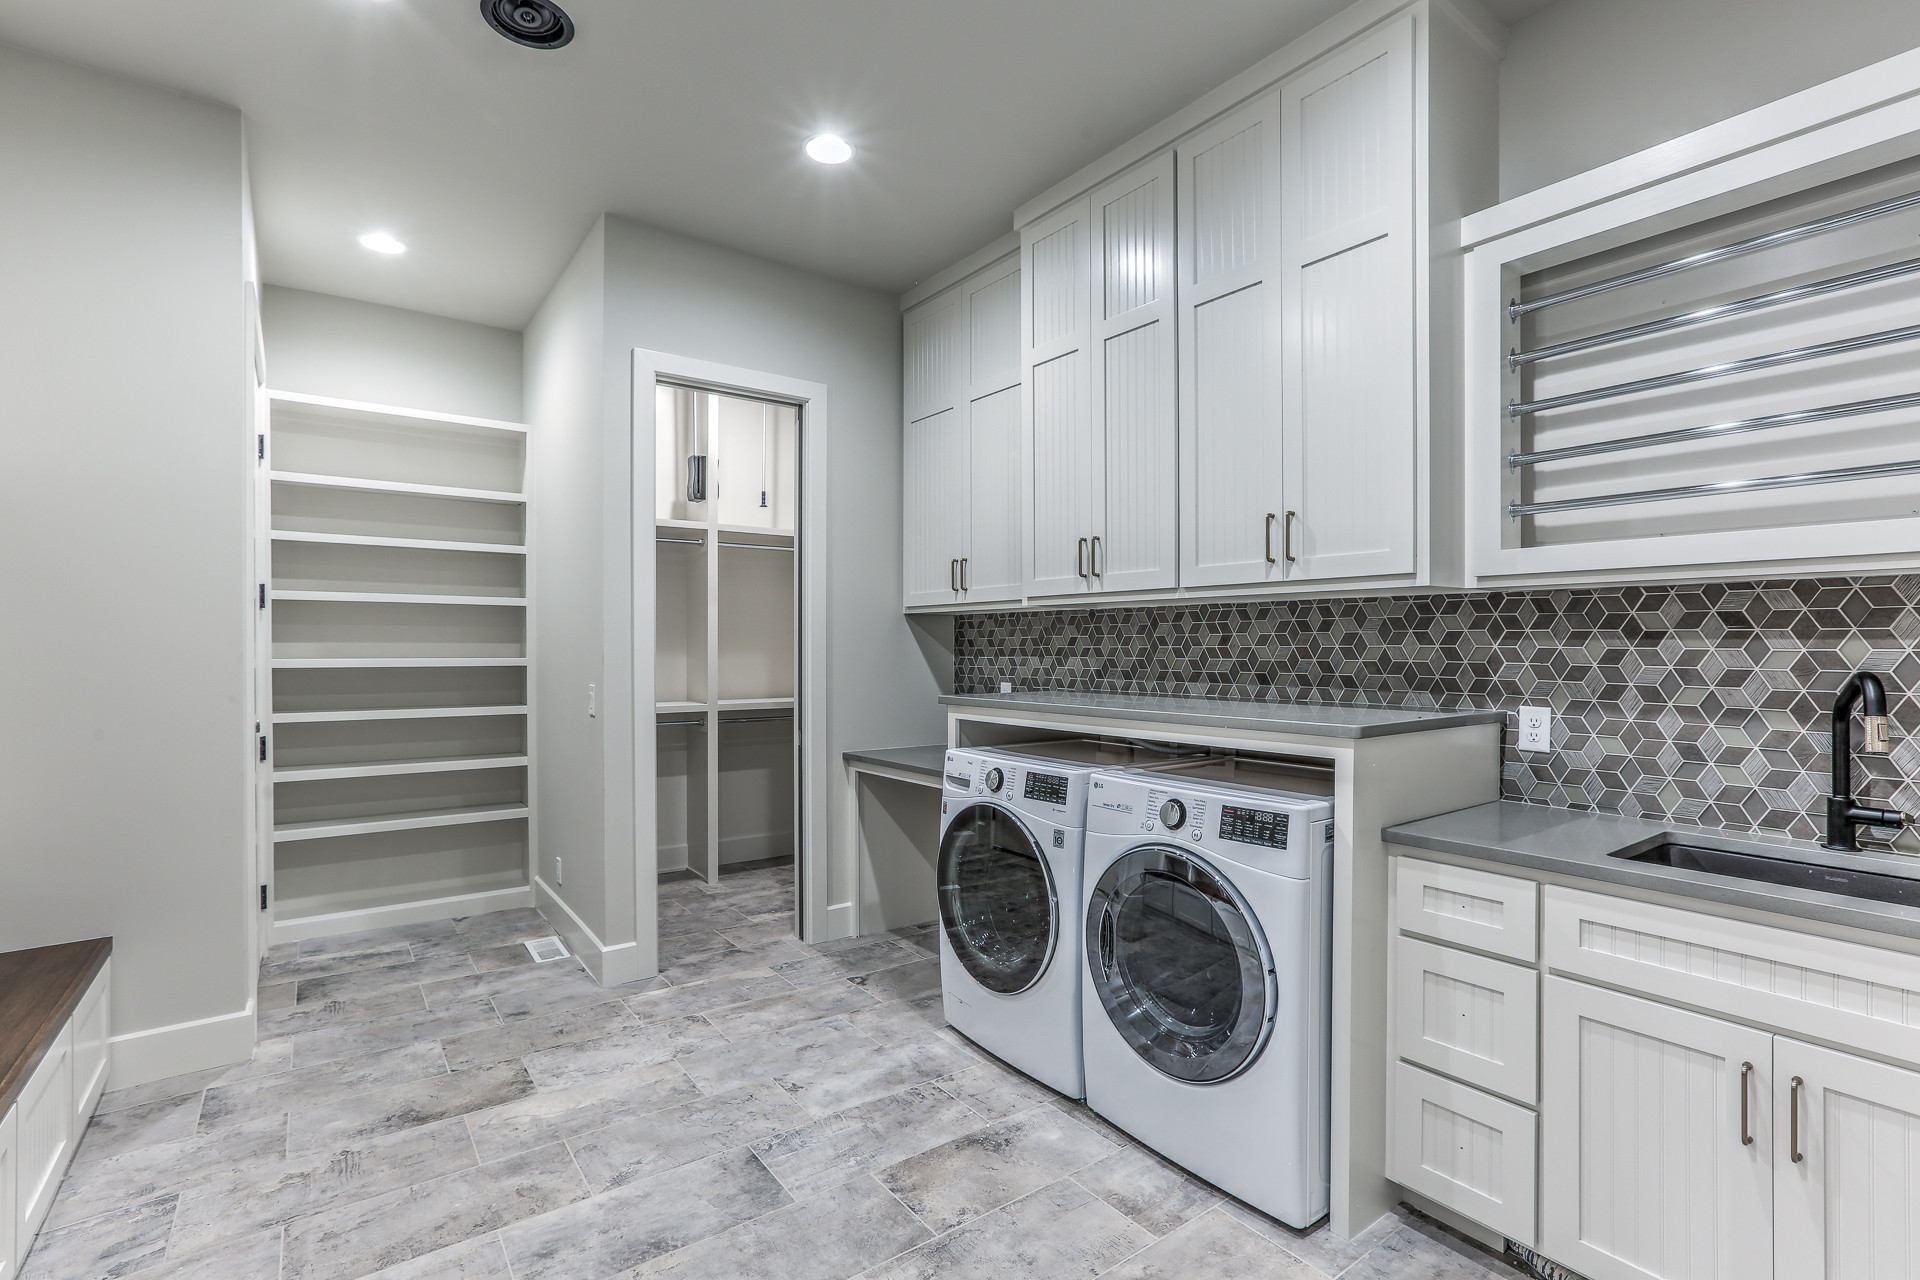 Example of a mountain style laundry room design in Omaha